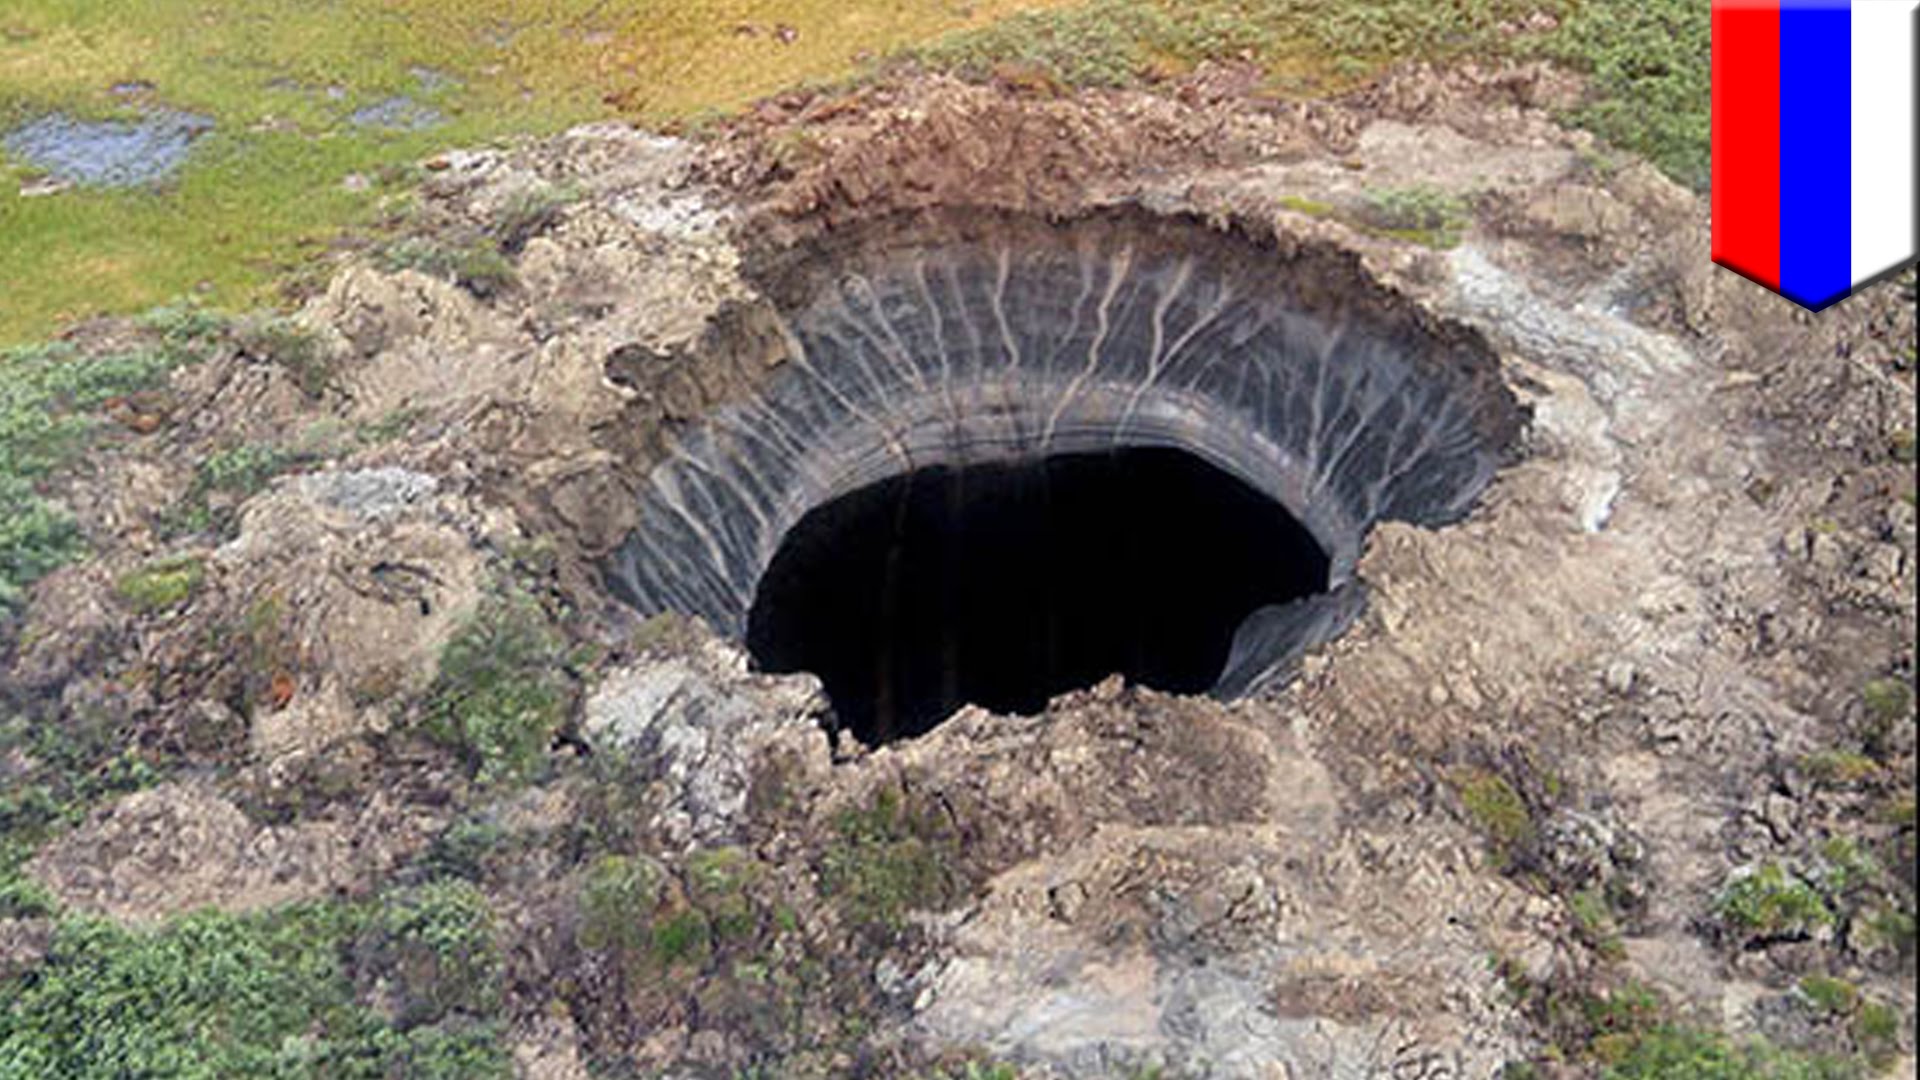 Mysterious sinkhole: Scientists discover giant 30 meter-wide crater in northern Siberia